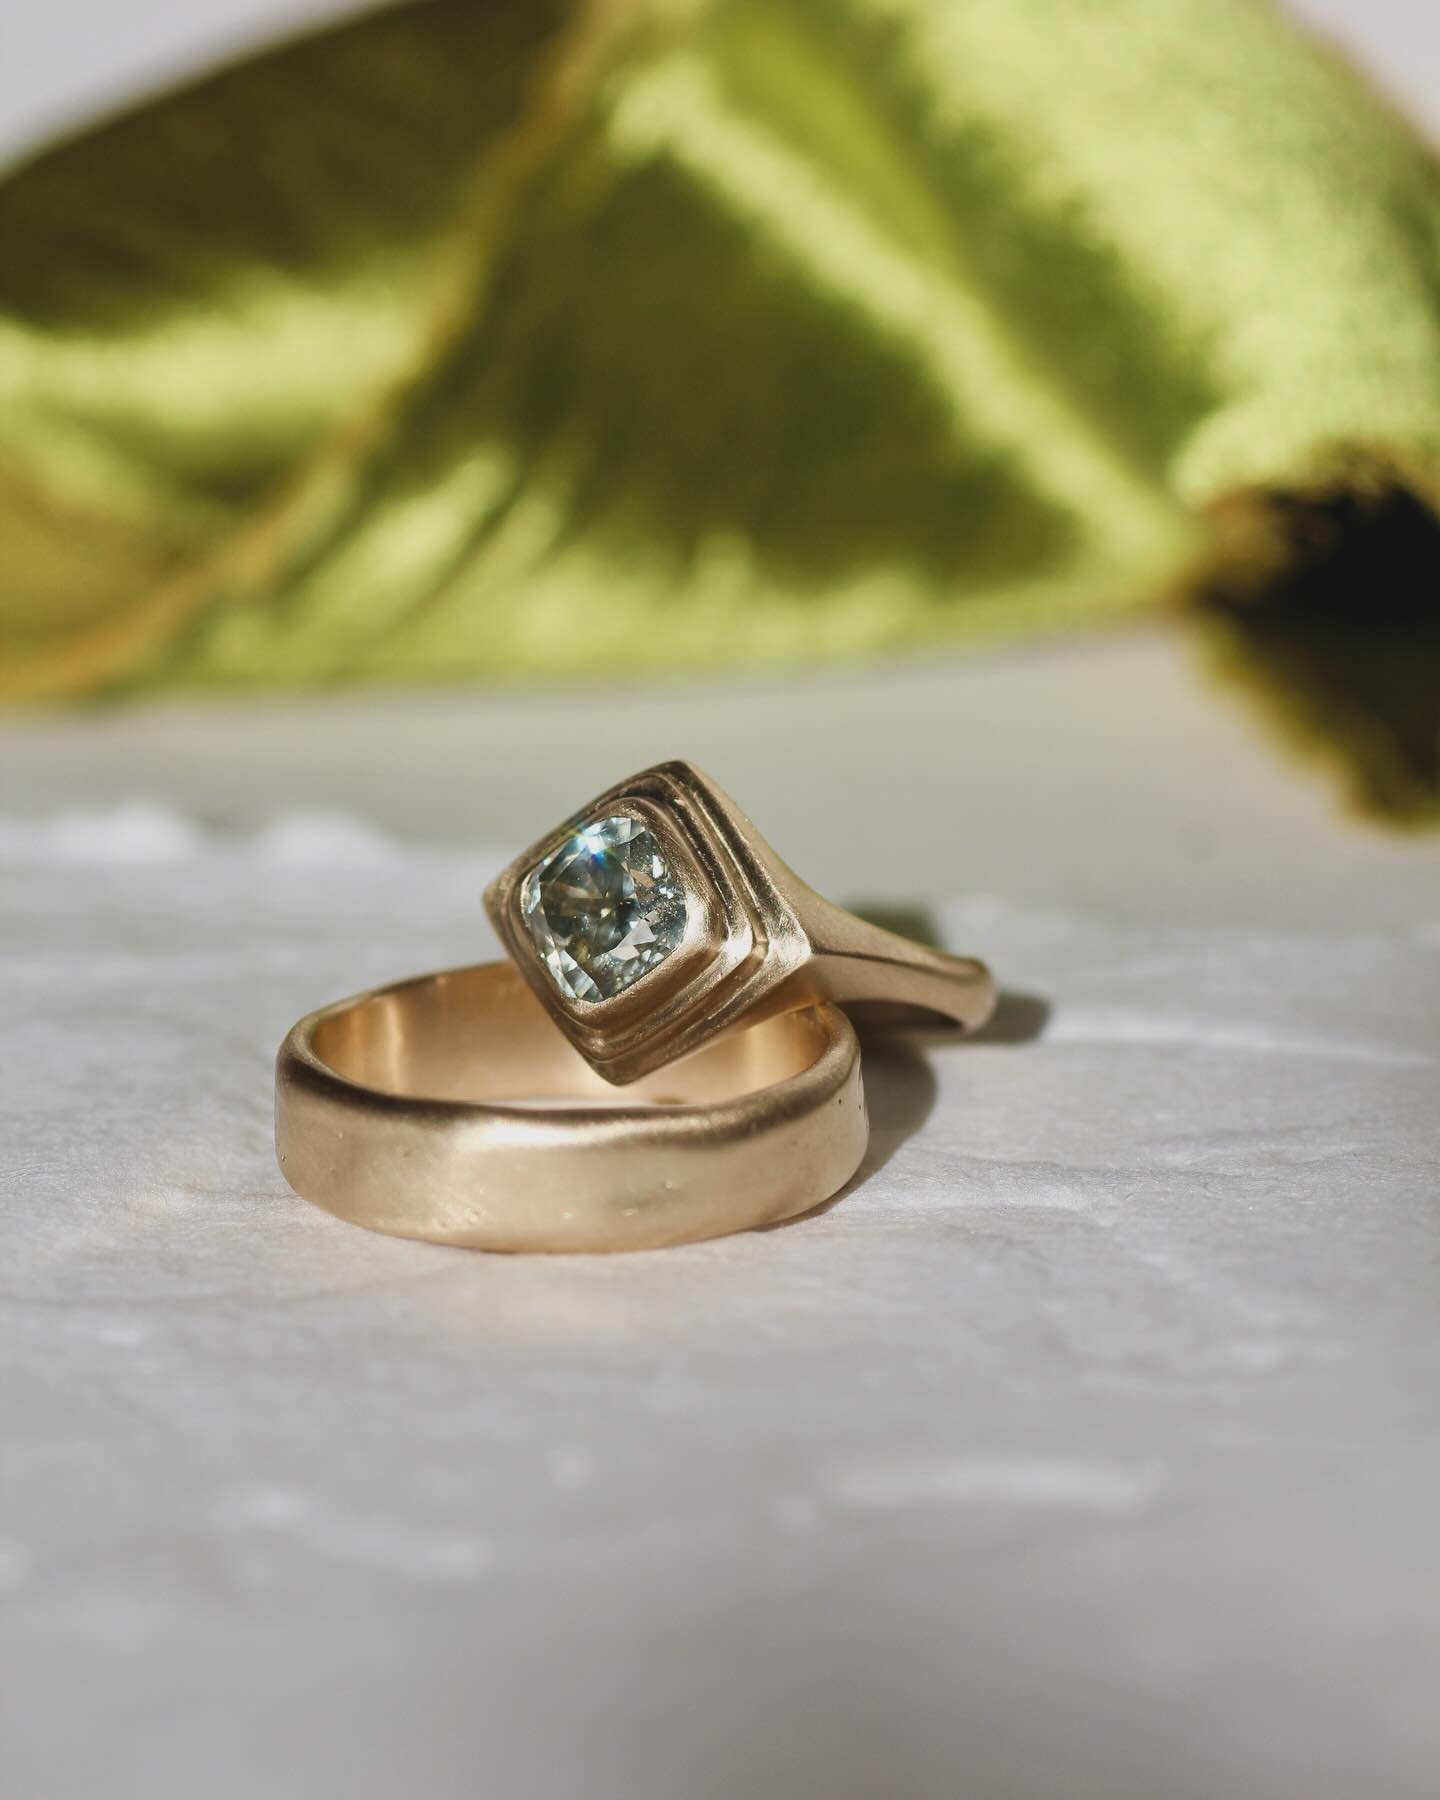 I&rsquo;m finally sharing these rings I made a couple months ago for two of my favourite people. We remade their wedding rings which were, in their words, generic, kind of boring box-store rings. They wanted rings that were unique and felt more speci